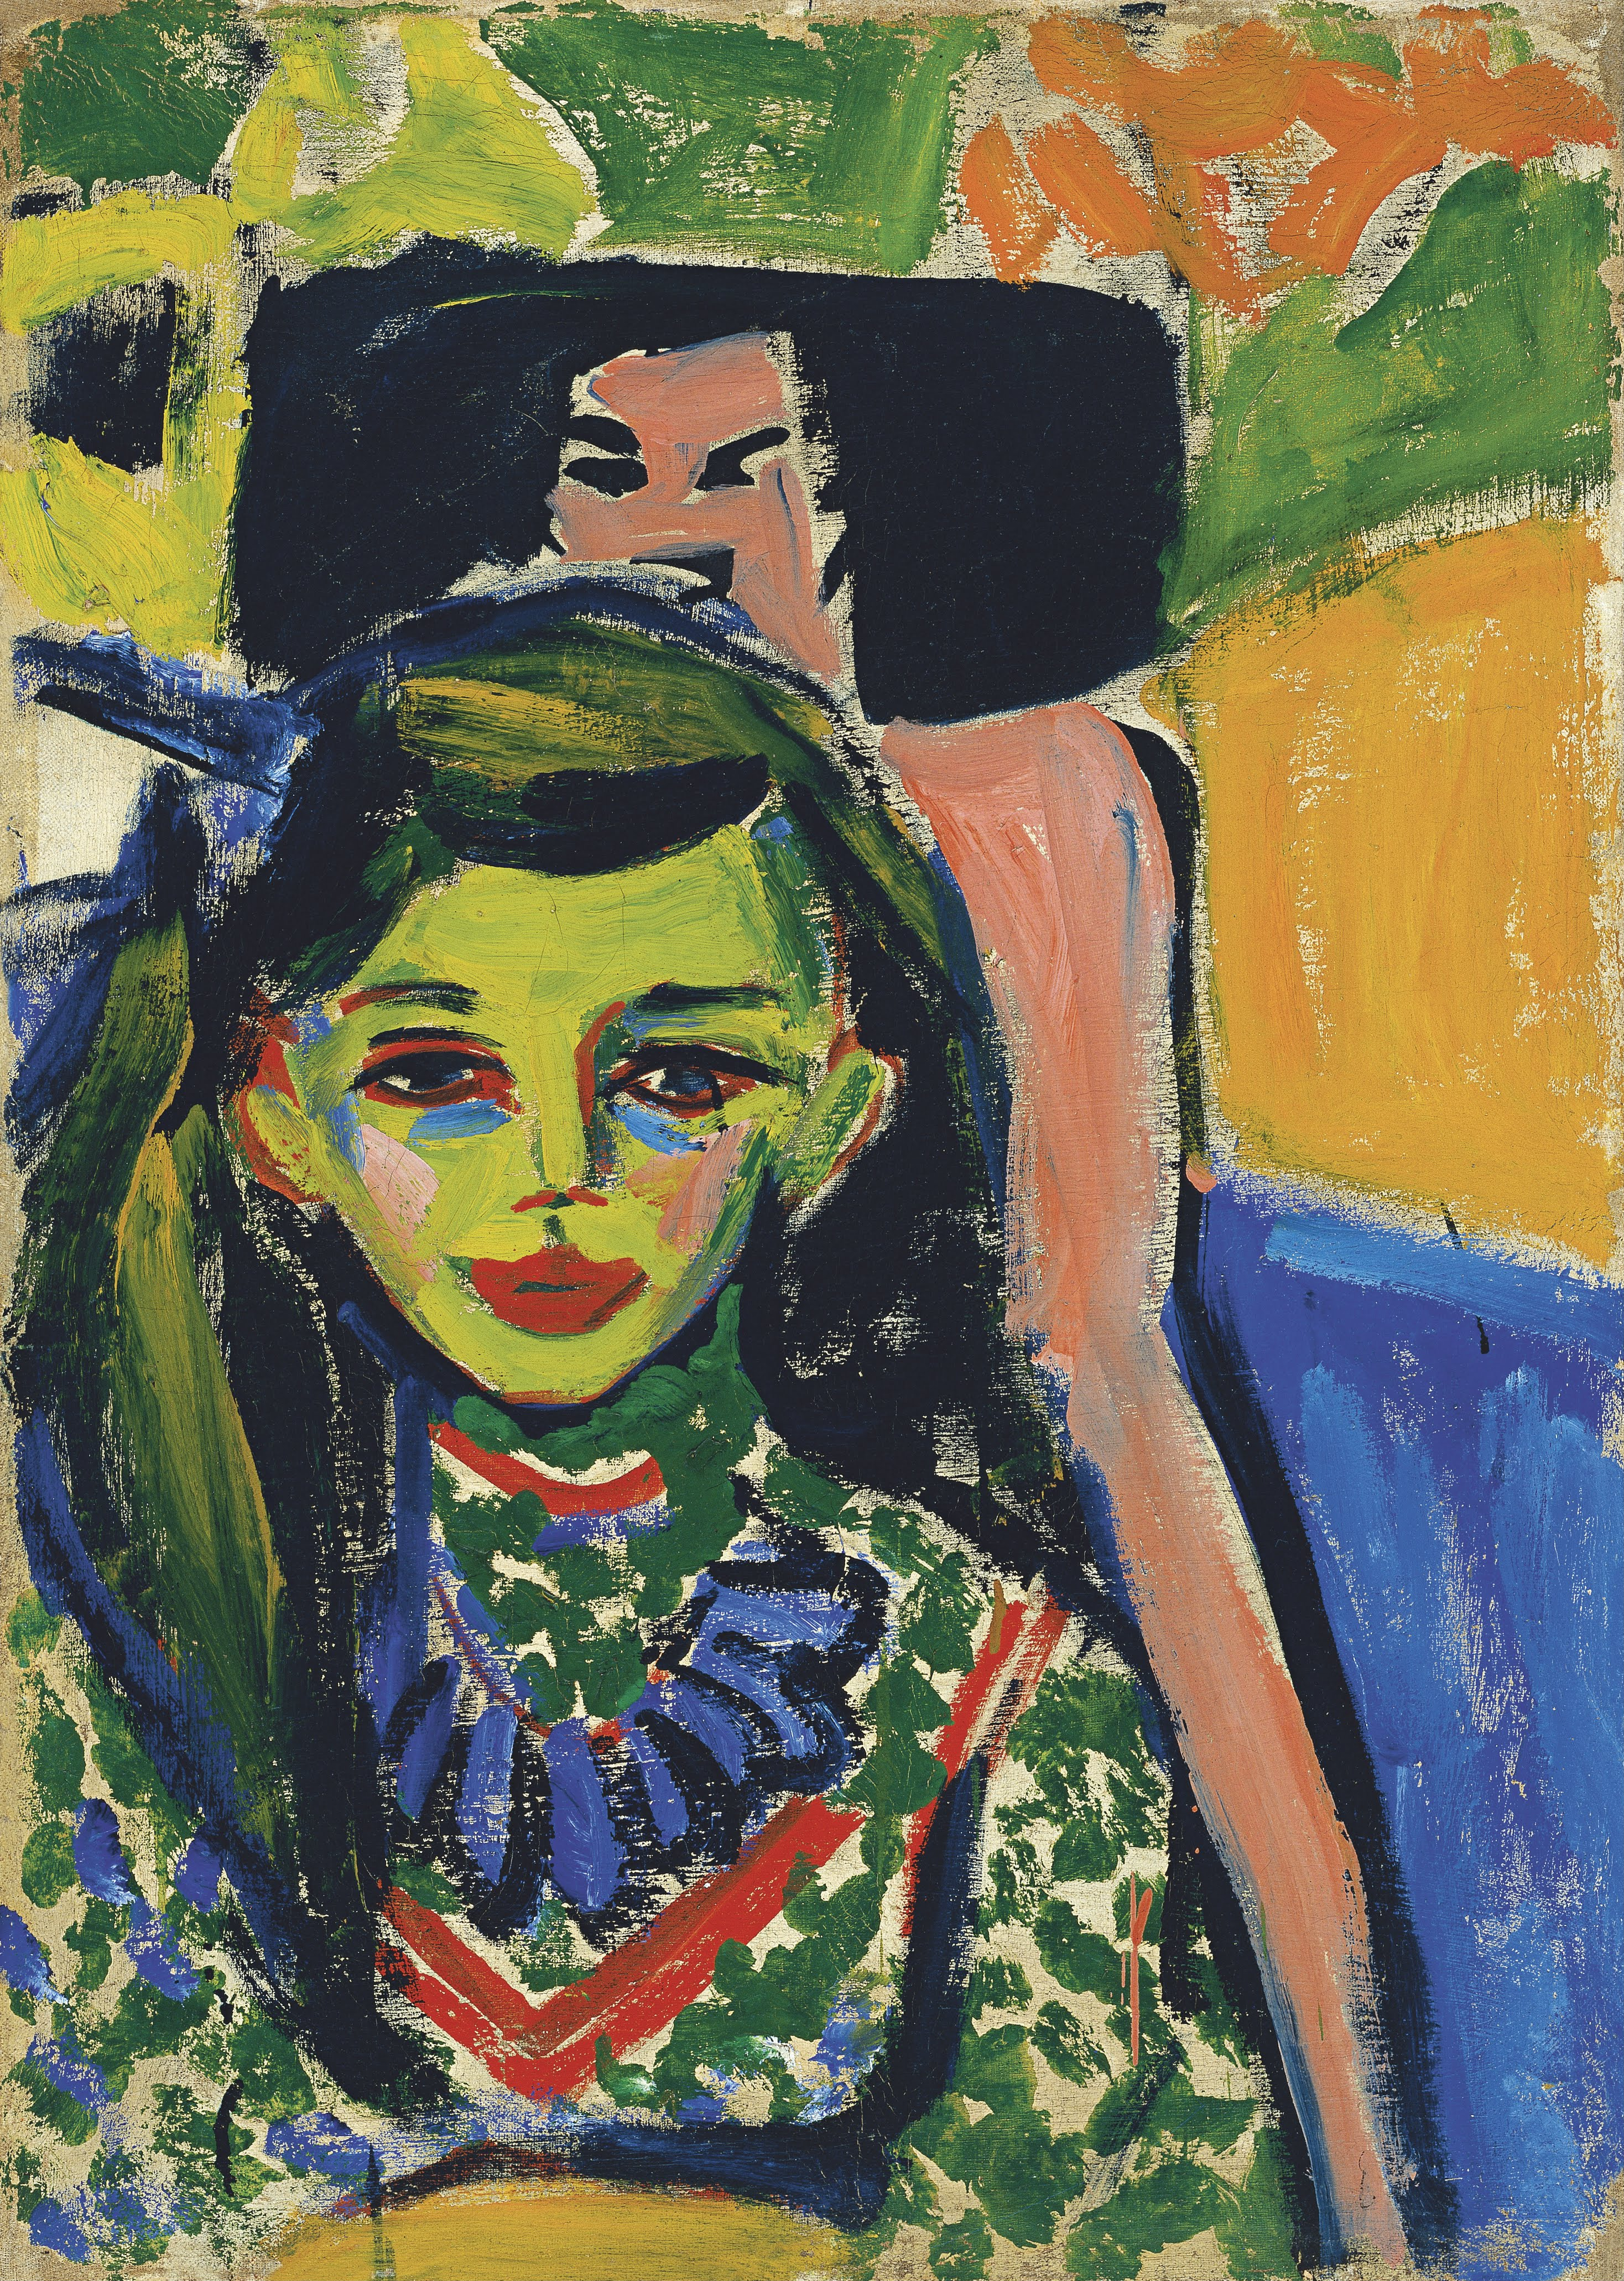 Fränzi in front of Carved Chair by Ernst Ludwig Kirchner - 1910 - 49.5 x 71 cm Museo Nacional Thyssen-Bornemisza